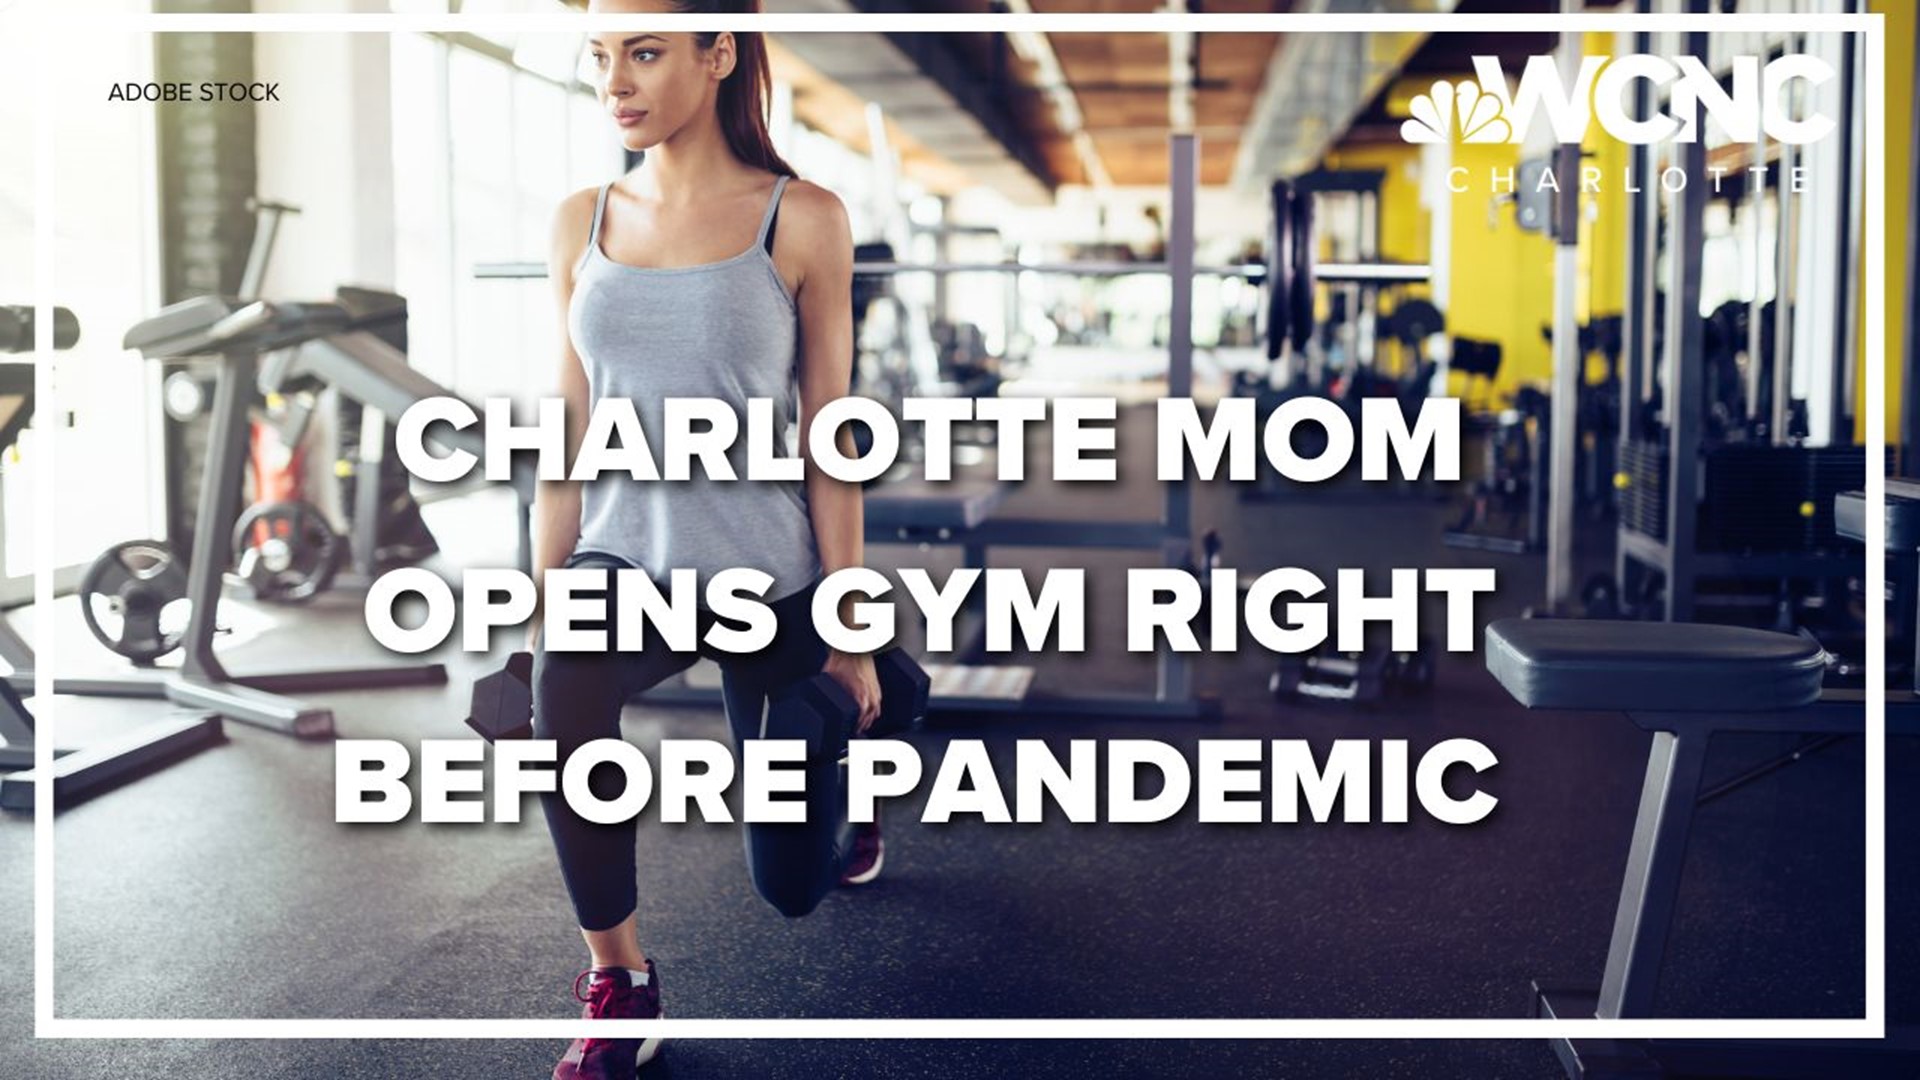 A single mom here in charlotte walked away from a safe desk job to start a risky new business and was just getting into a groove when the pandemic showed up.